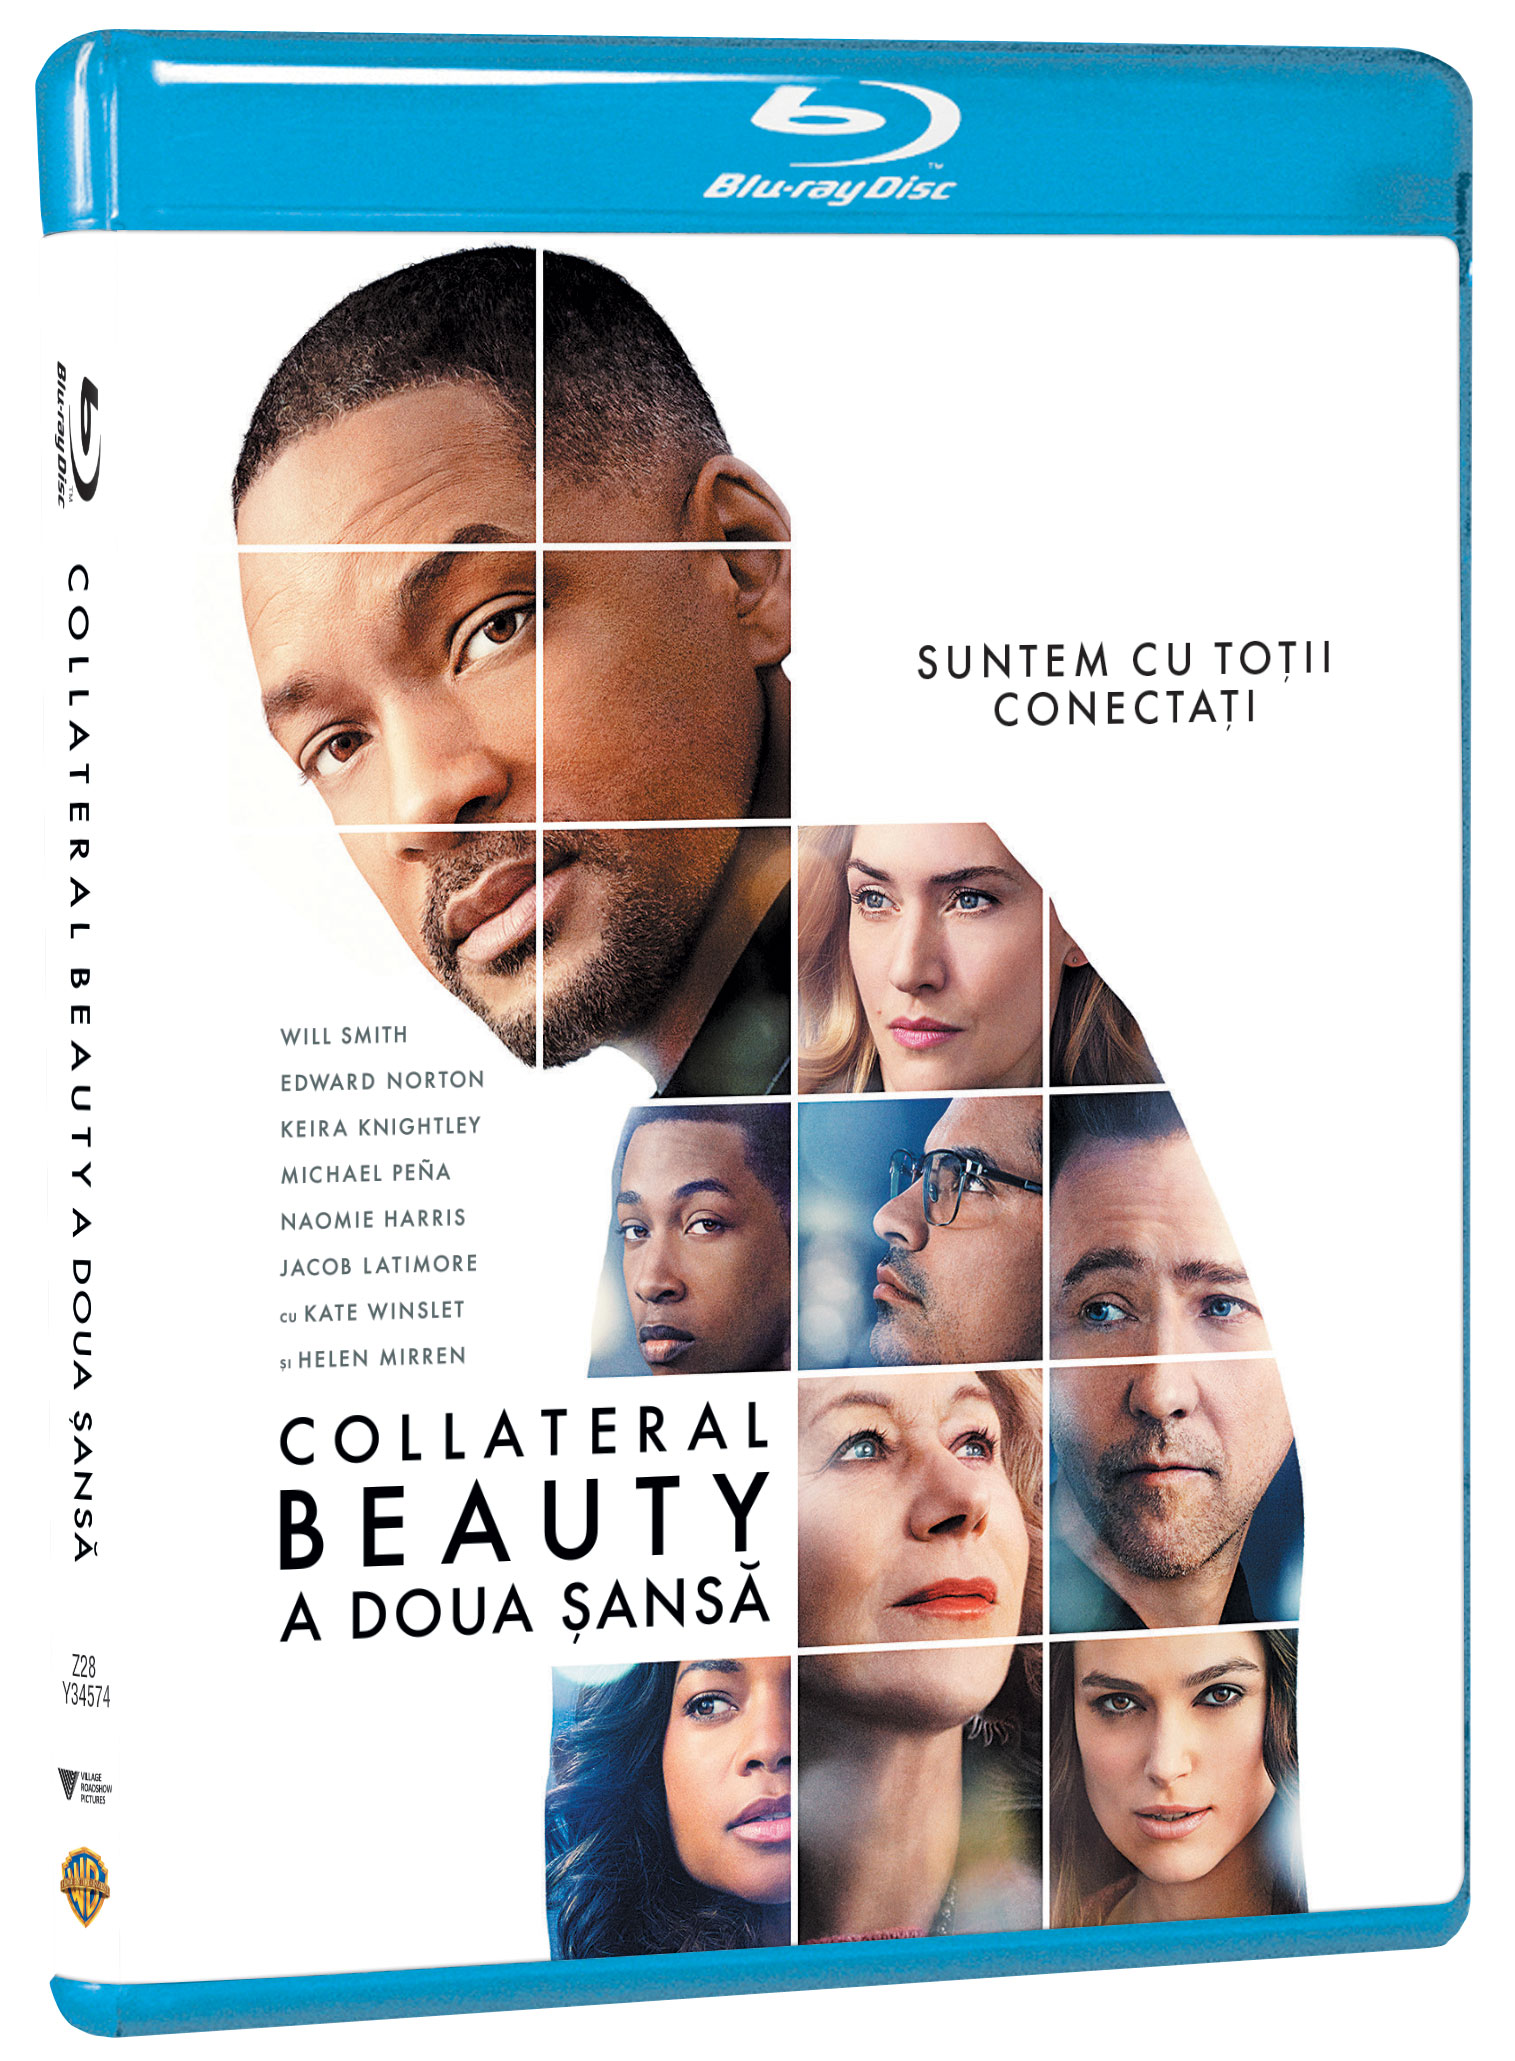 Collateral Beauty: A doua sansa (Blu Ray Disc) / Collateral Beauty | David Frankel